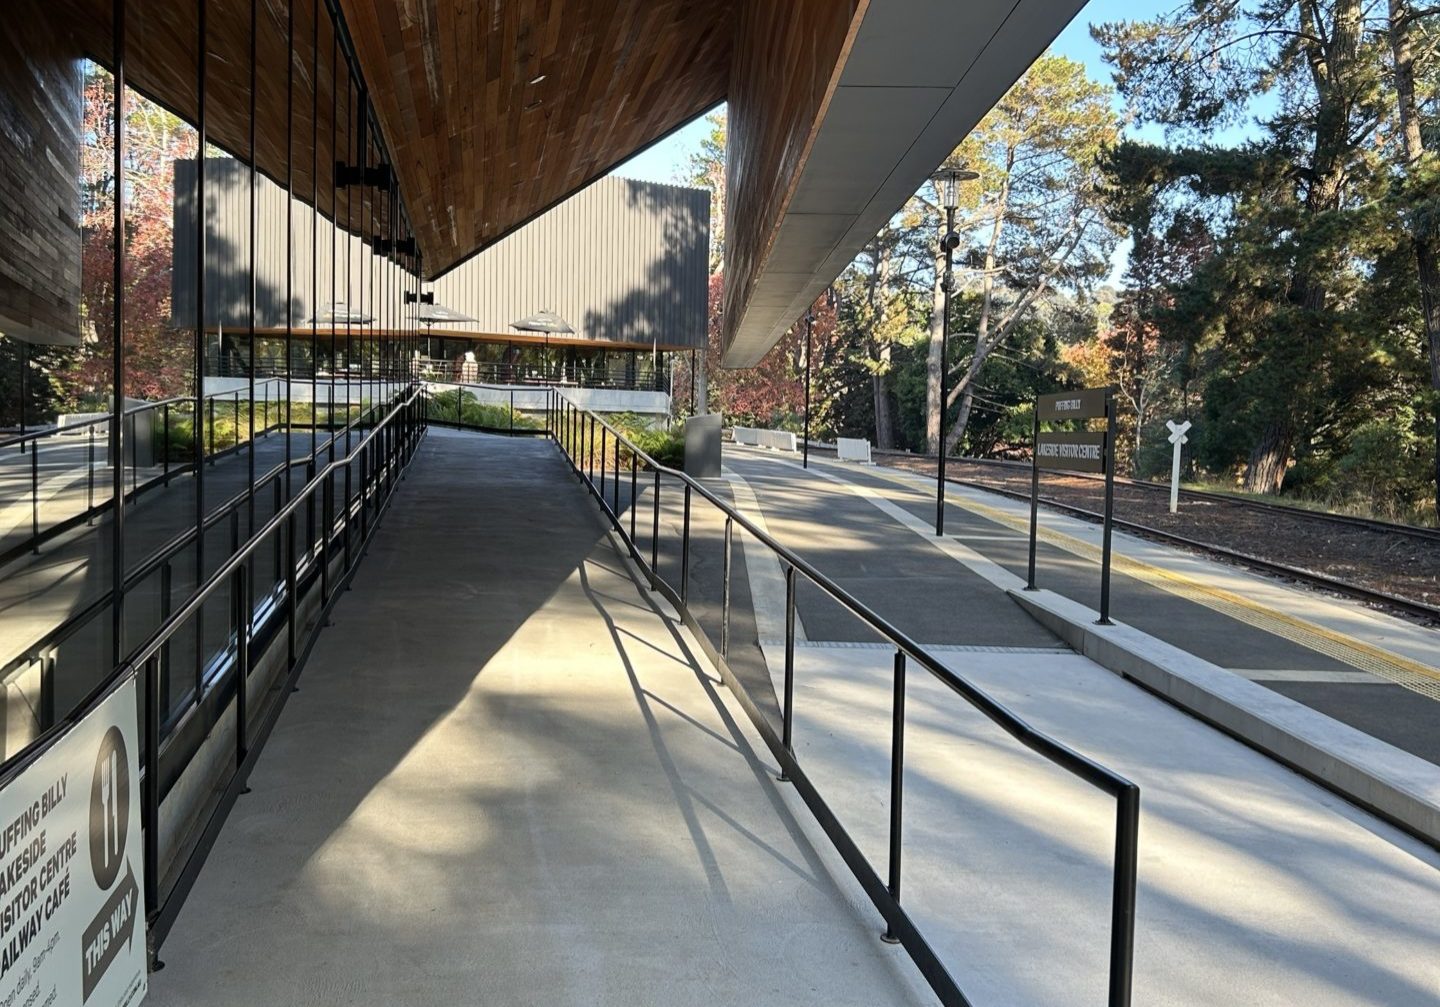 Ramp up to an alfresco deck. A train platform is located adjacent to the ramp.